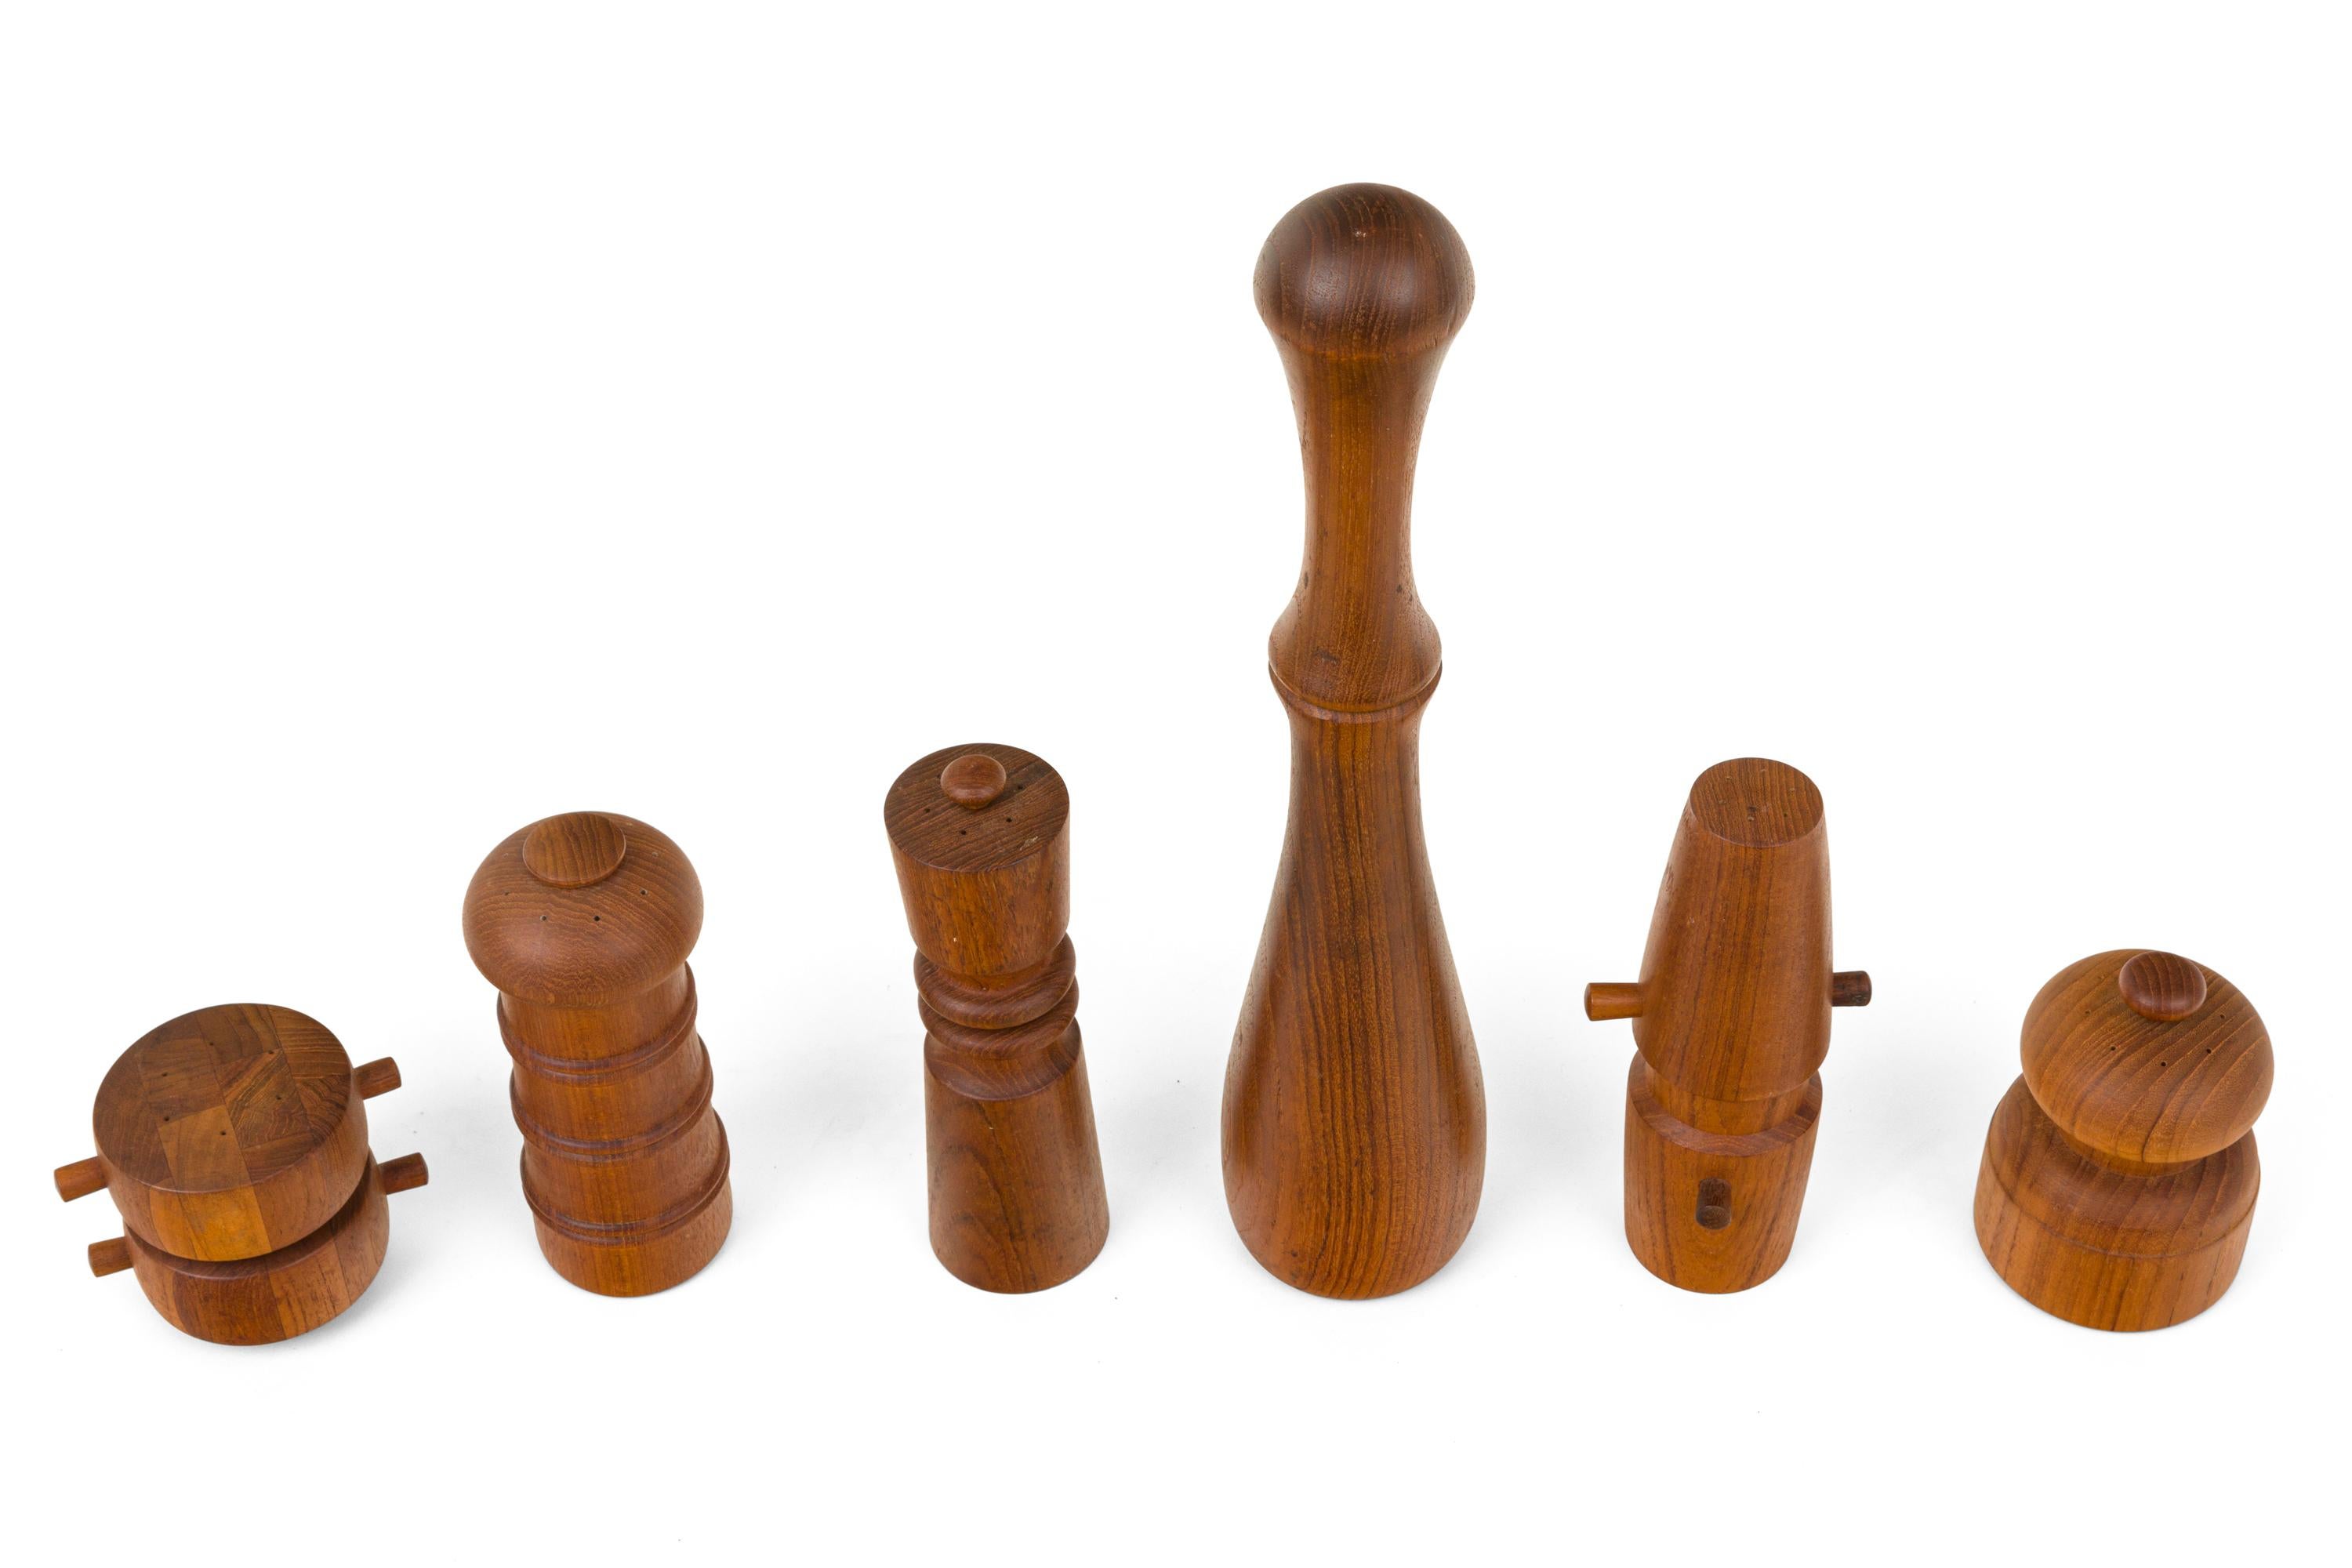 A nice variety of the iconic Dansk teak pepper mills and salt shakers available individually. The tallest measure 16.25